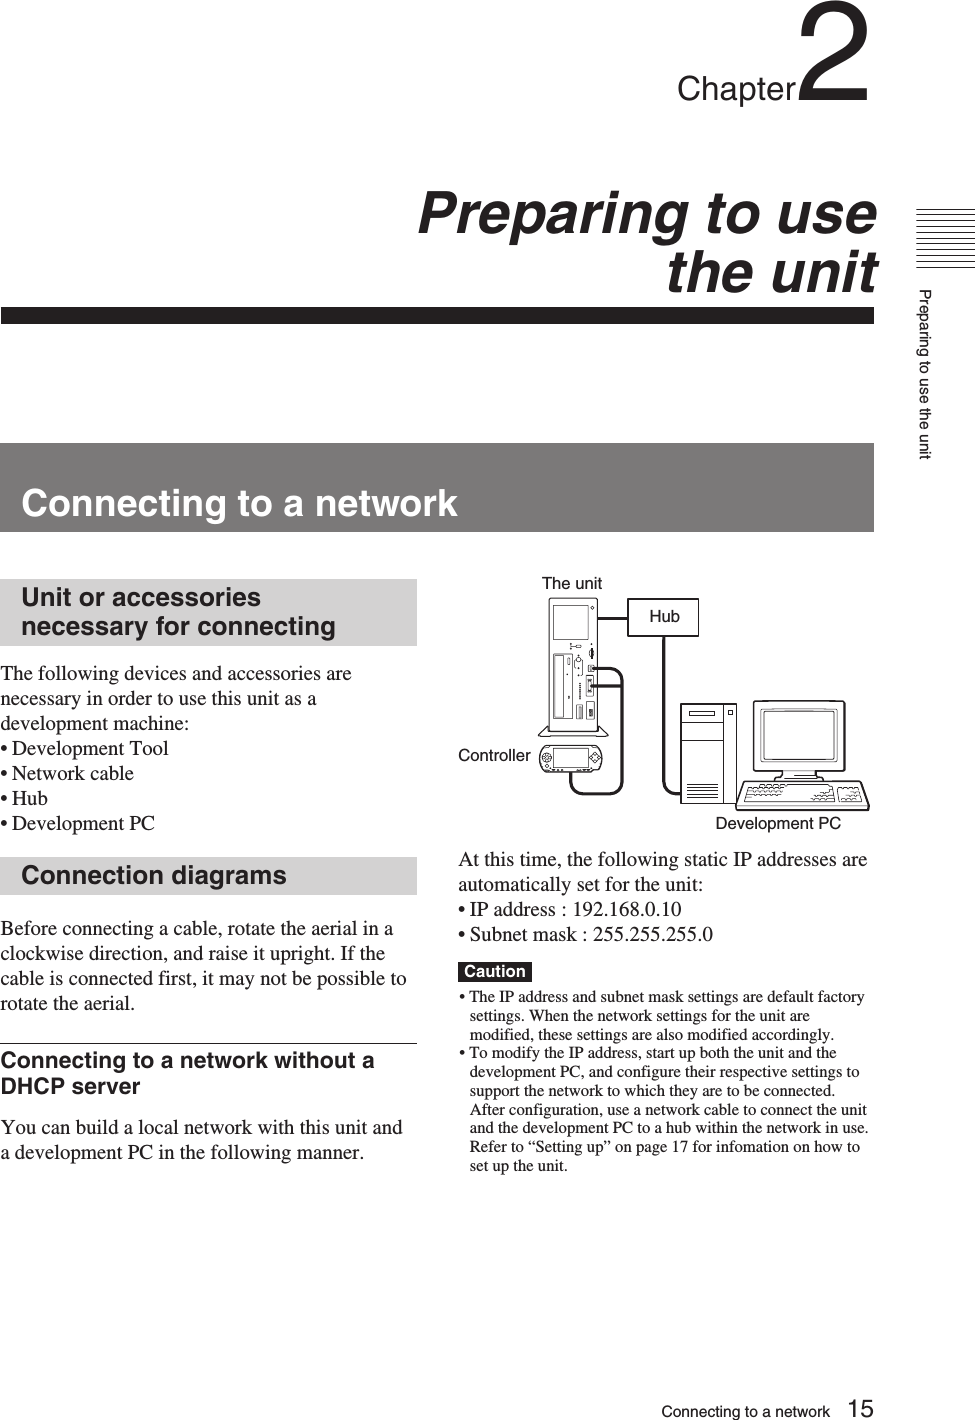 Preparing to use the unit15Chapter2Preparing to usethe unitConnecting to a networkUnit or accessoriesnecessary for connectingThe following devices and accessories arenecessary in order to use this unit as adevelopment machine:•Development Tool•Network cable•Hub•Development PCConnection diagramsBefore connecting a cable, rotate the aerial in aclockwise direction, and raise it upright. If thecable is connected first, it may not be possible torotate the aerial.Connecting to a network without aDHCP serverYou can build a local network with this unit anda development PC in the following manner.At this time, the following static IP addresses areautomatically set for the unit:• IP address : 192.168.0.10•Subnet mask : 255.255.255.0Caution• The IP address and subnet mask settings are default factorysettings. When the network settings for the unit aremodified, these settings are also modified accordingly.• To modify the IP address, start up both the unit and thedevelopment PC, and configure their respective settings tosupport the network to which they are to be connected.After configuration, use a network cable to connect the unitand the development PC to a hub within the network in use.Refer to “Setting up” on page 17 for infomation on how toset up the unit.HubControllerThe unitDevelopment PCConnecting to a network